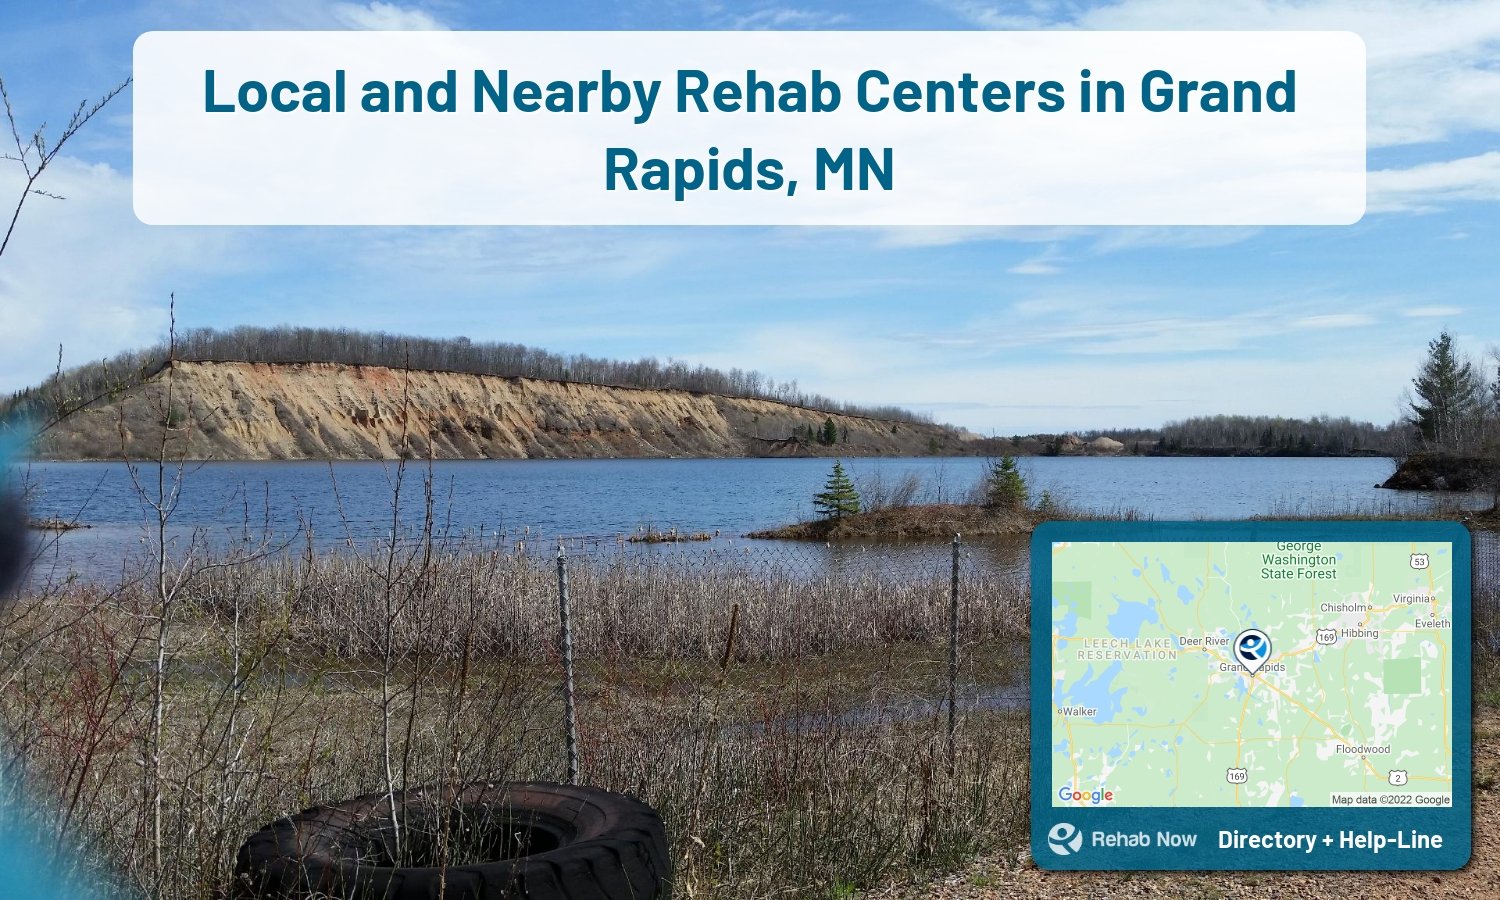 Grand Rapids, MN Treatment Centers. Find drug rehab in Grand Rapids, Minnesota, or detox and treatment programs. Get the right help now!